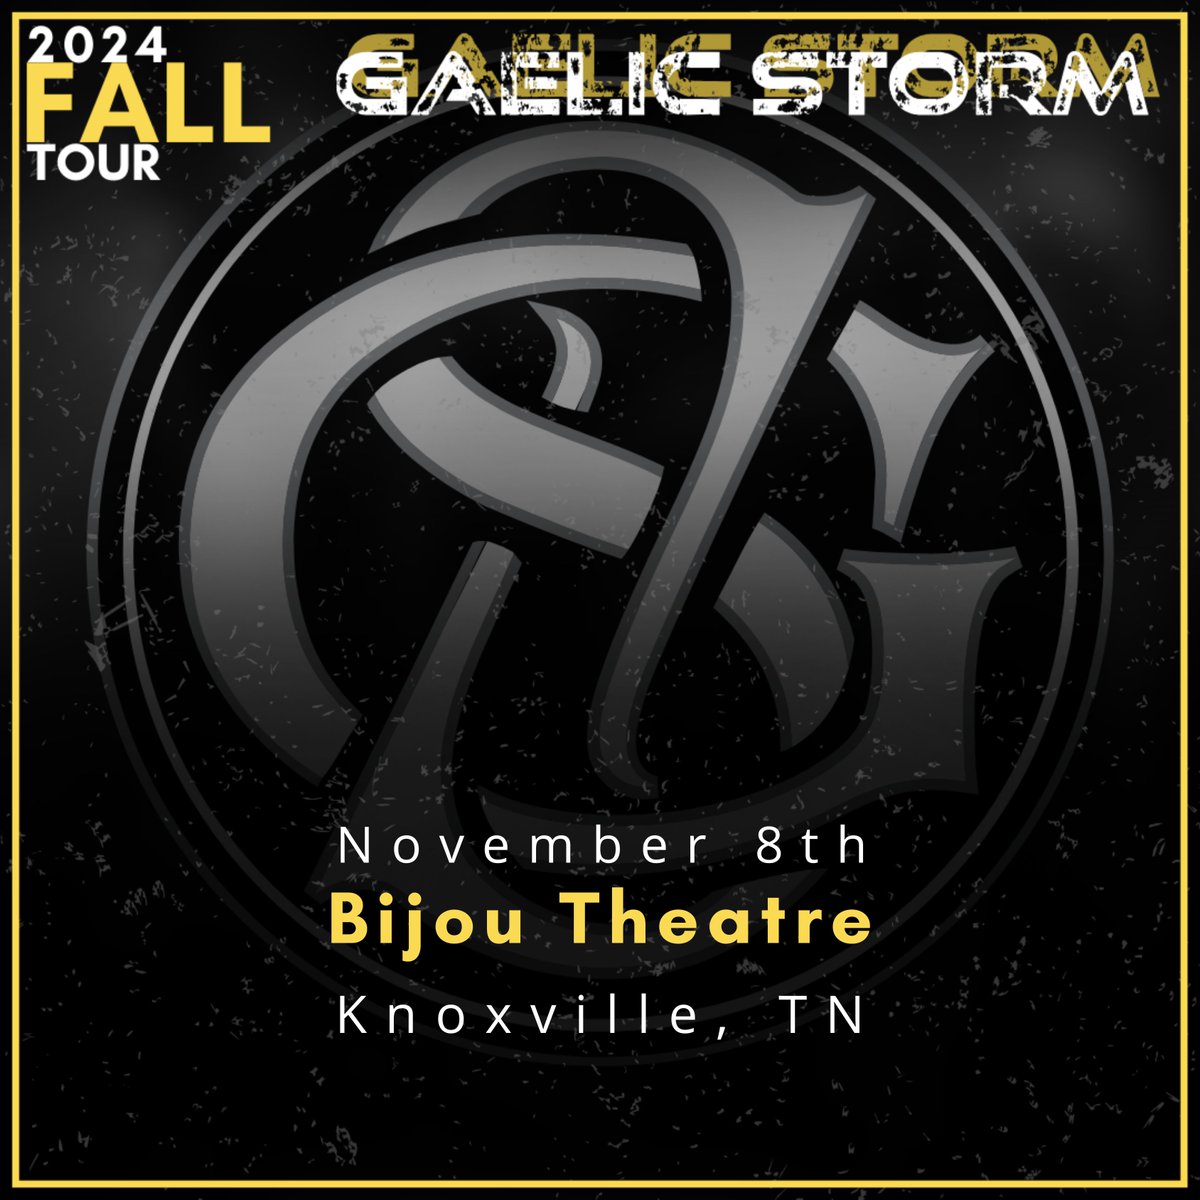 Guess who's back 🍀 Gaelic Storm returns to the Bijou Theatre for another unforgettable performance on November 8! Tickets on sale this Friday at 10AM ET.